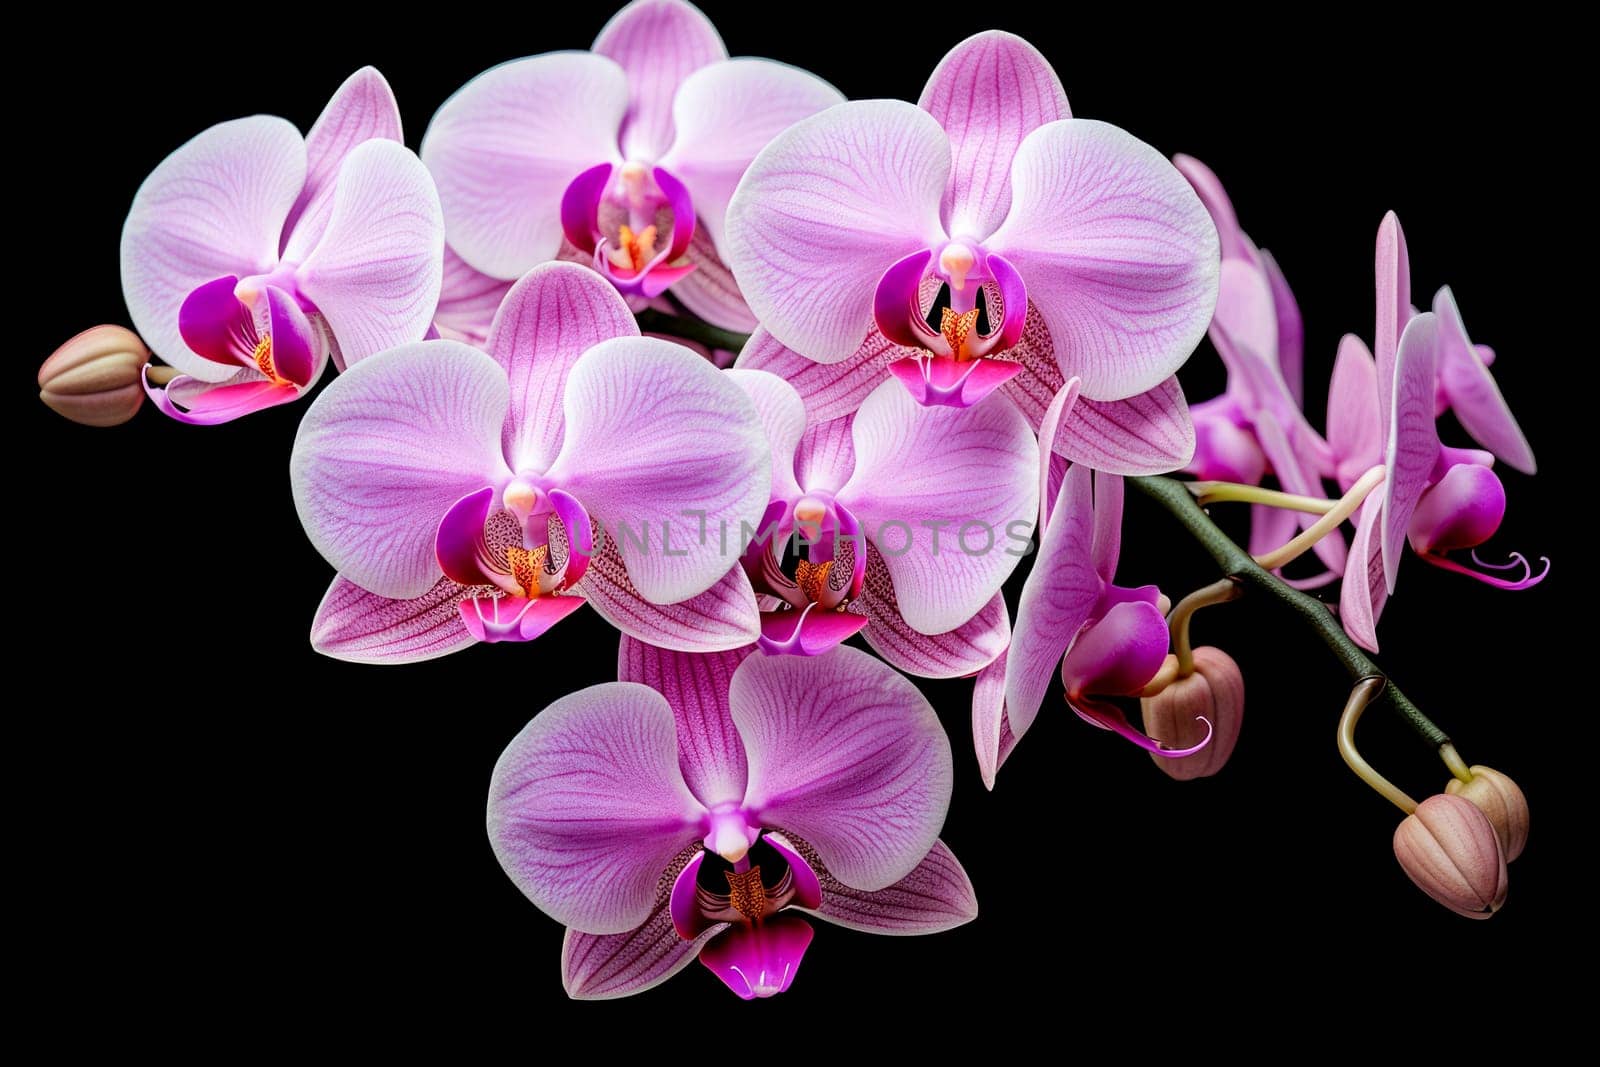 pink flower orchid Falinopsis on black background. Isolated object by Ramanouskaya